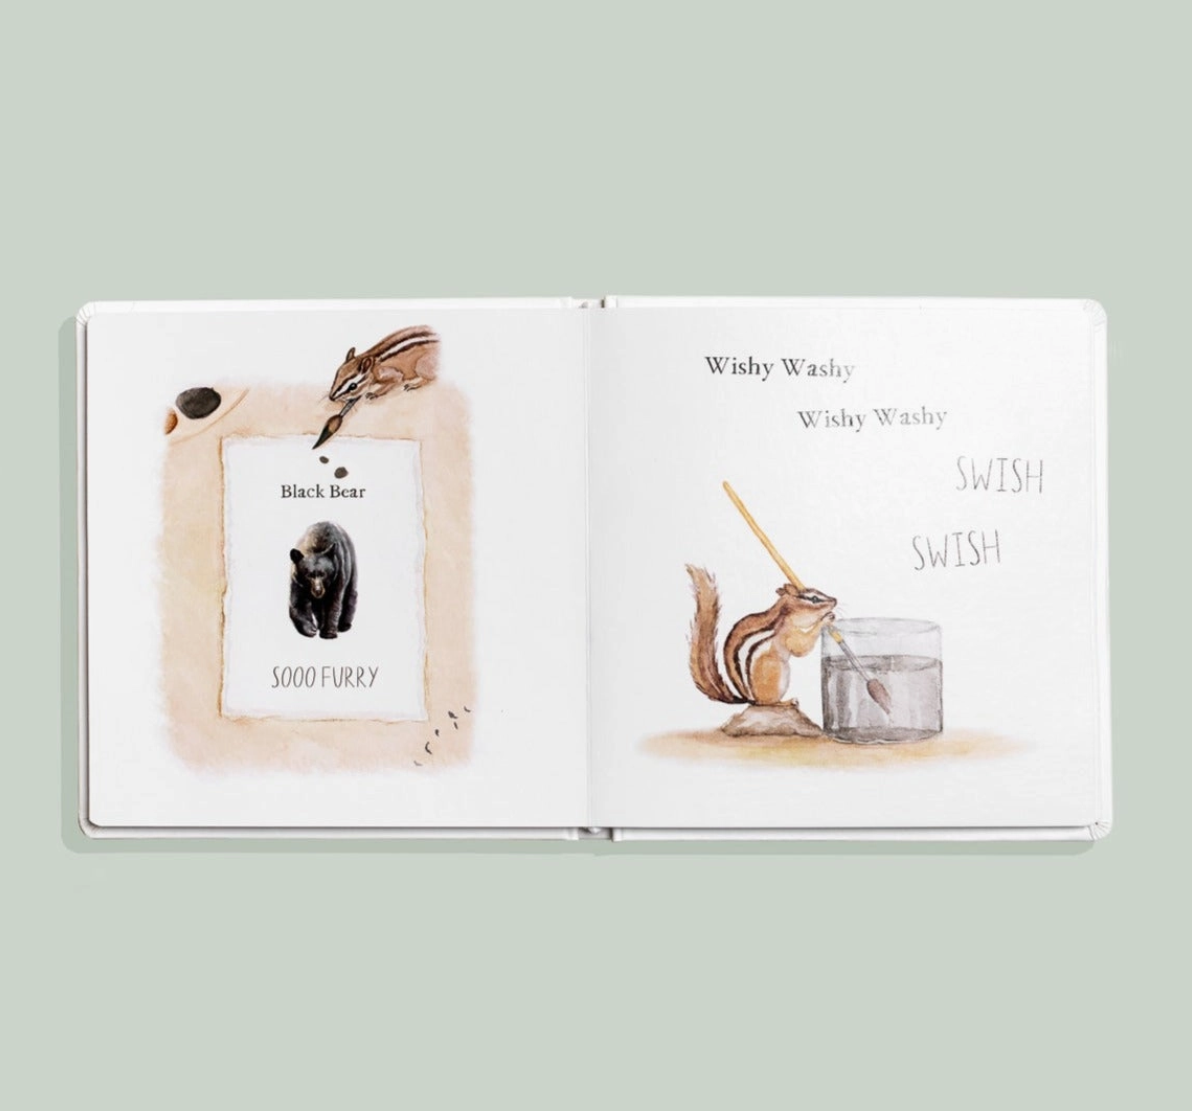 Wishy Washy: A Board Book of First Words and Colors